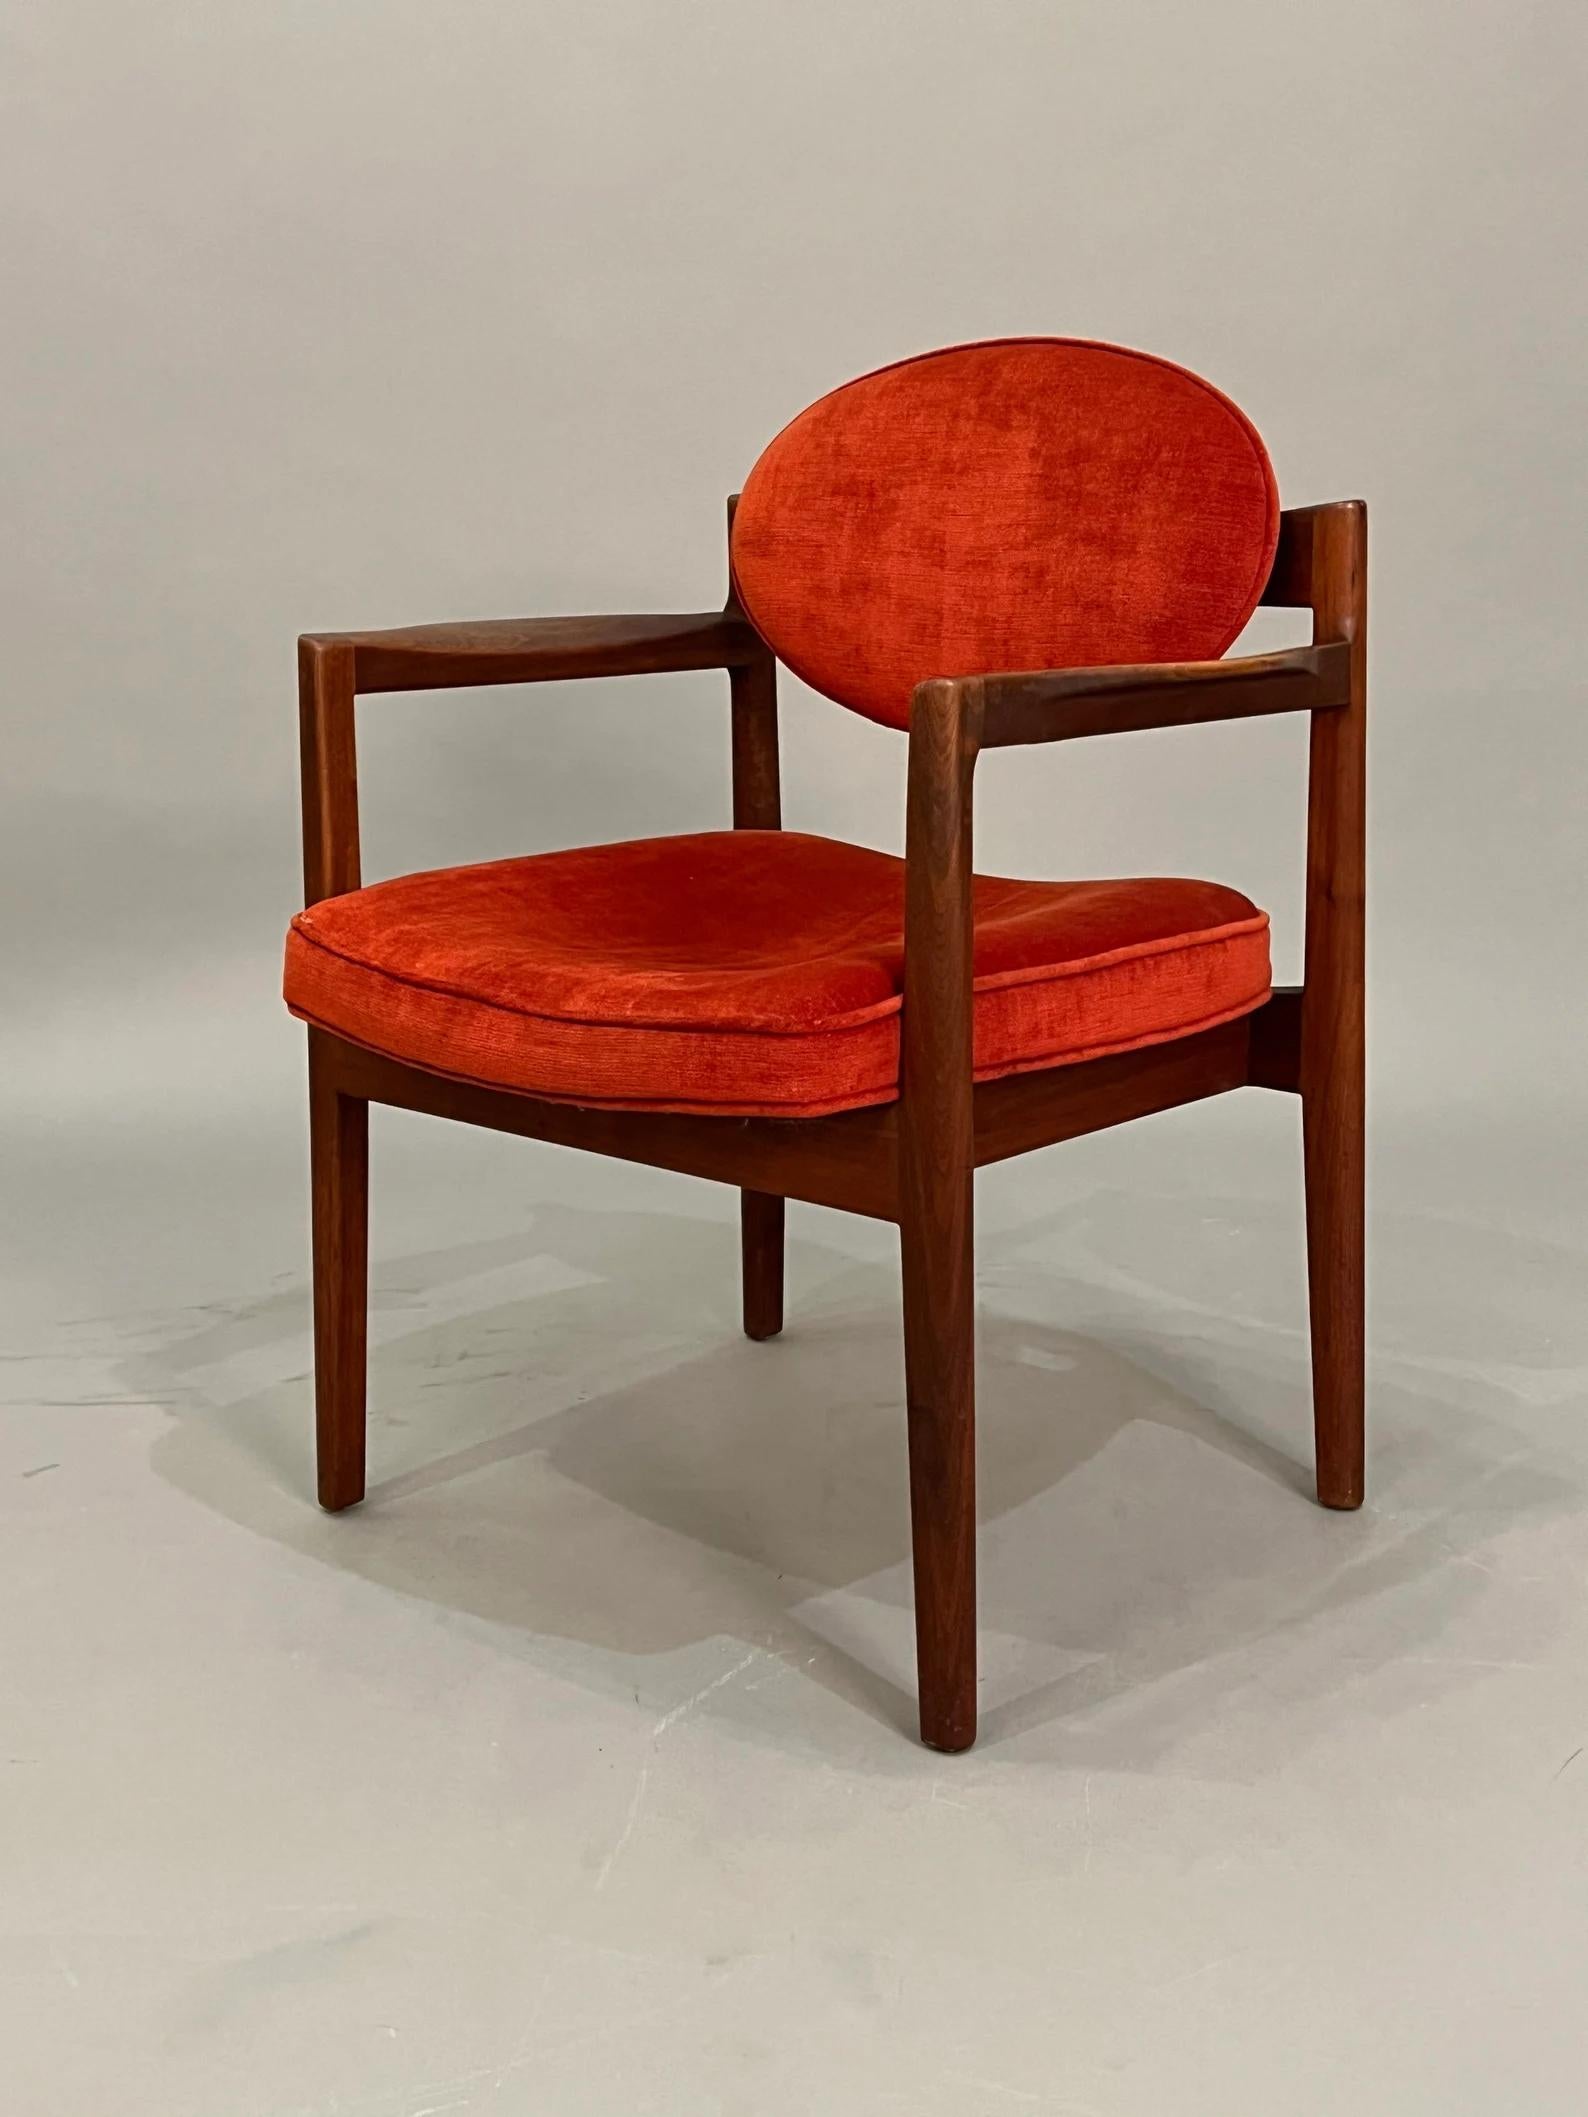 Midcentury, Jens Risom Office / dining chair original Upholstery 1960s
Arm to Arm 26” inches 
Interior Deep: 23” inches 
Seat height: 18” inches 
High-back: 33” inches 
Arms height: 26” inches.